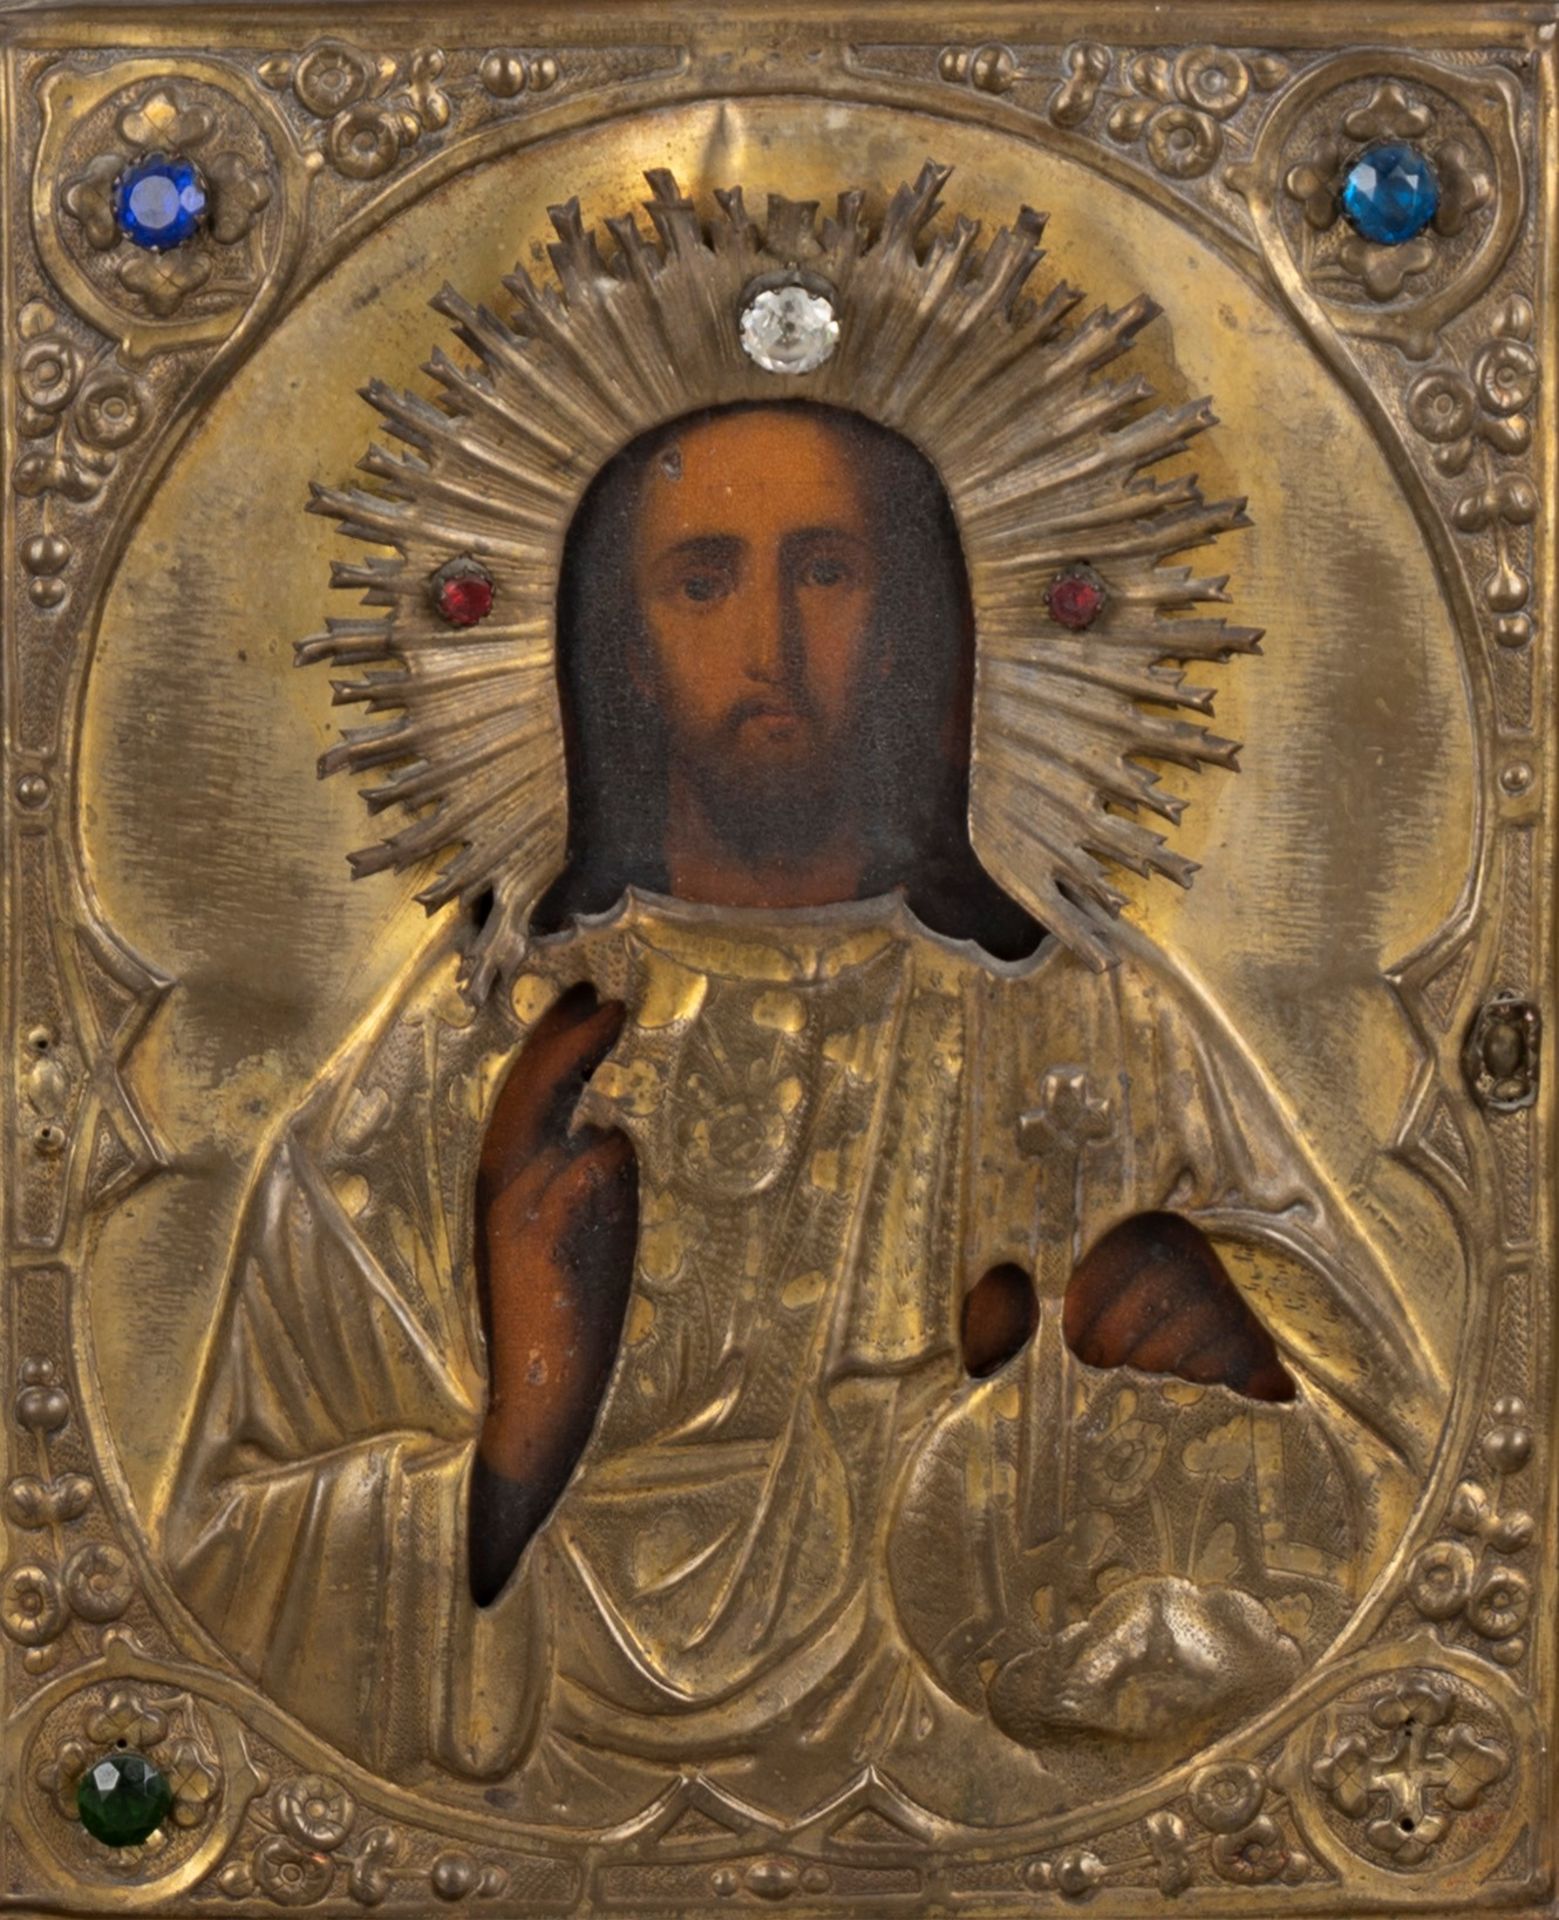 Icon with golden metal riza depicting Christ